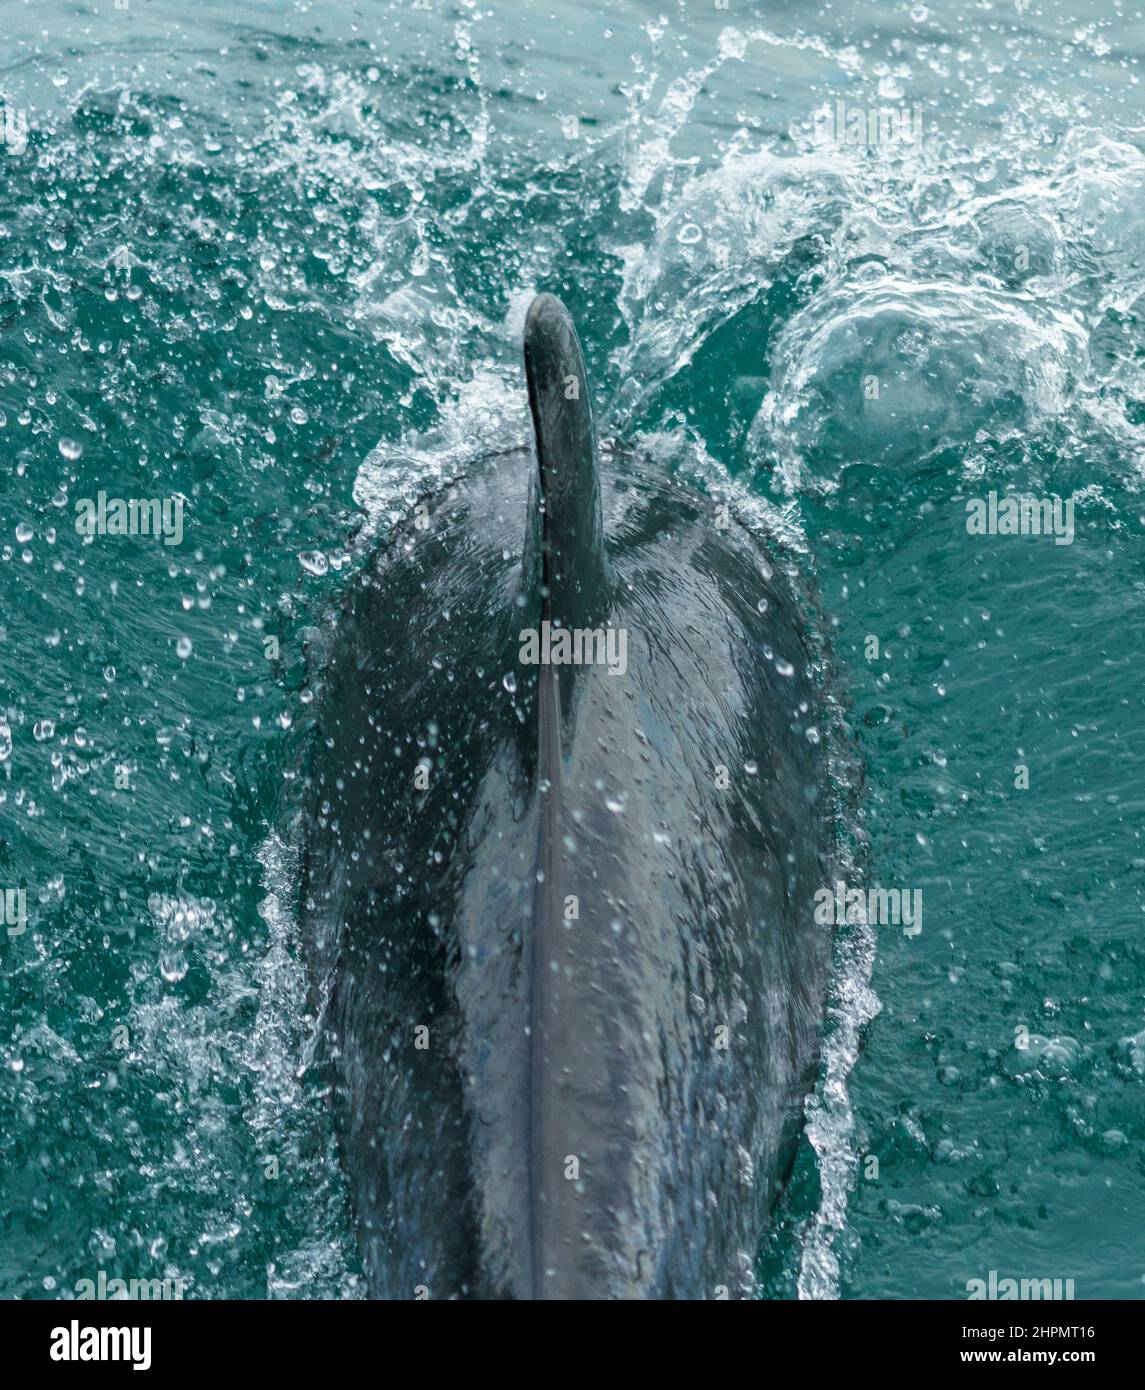 Dolphin viewed from directly behind as it races in front of a boat. Water churns on either side. Stock Photo